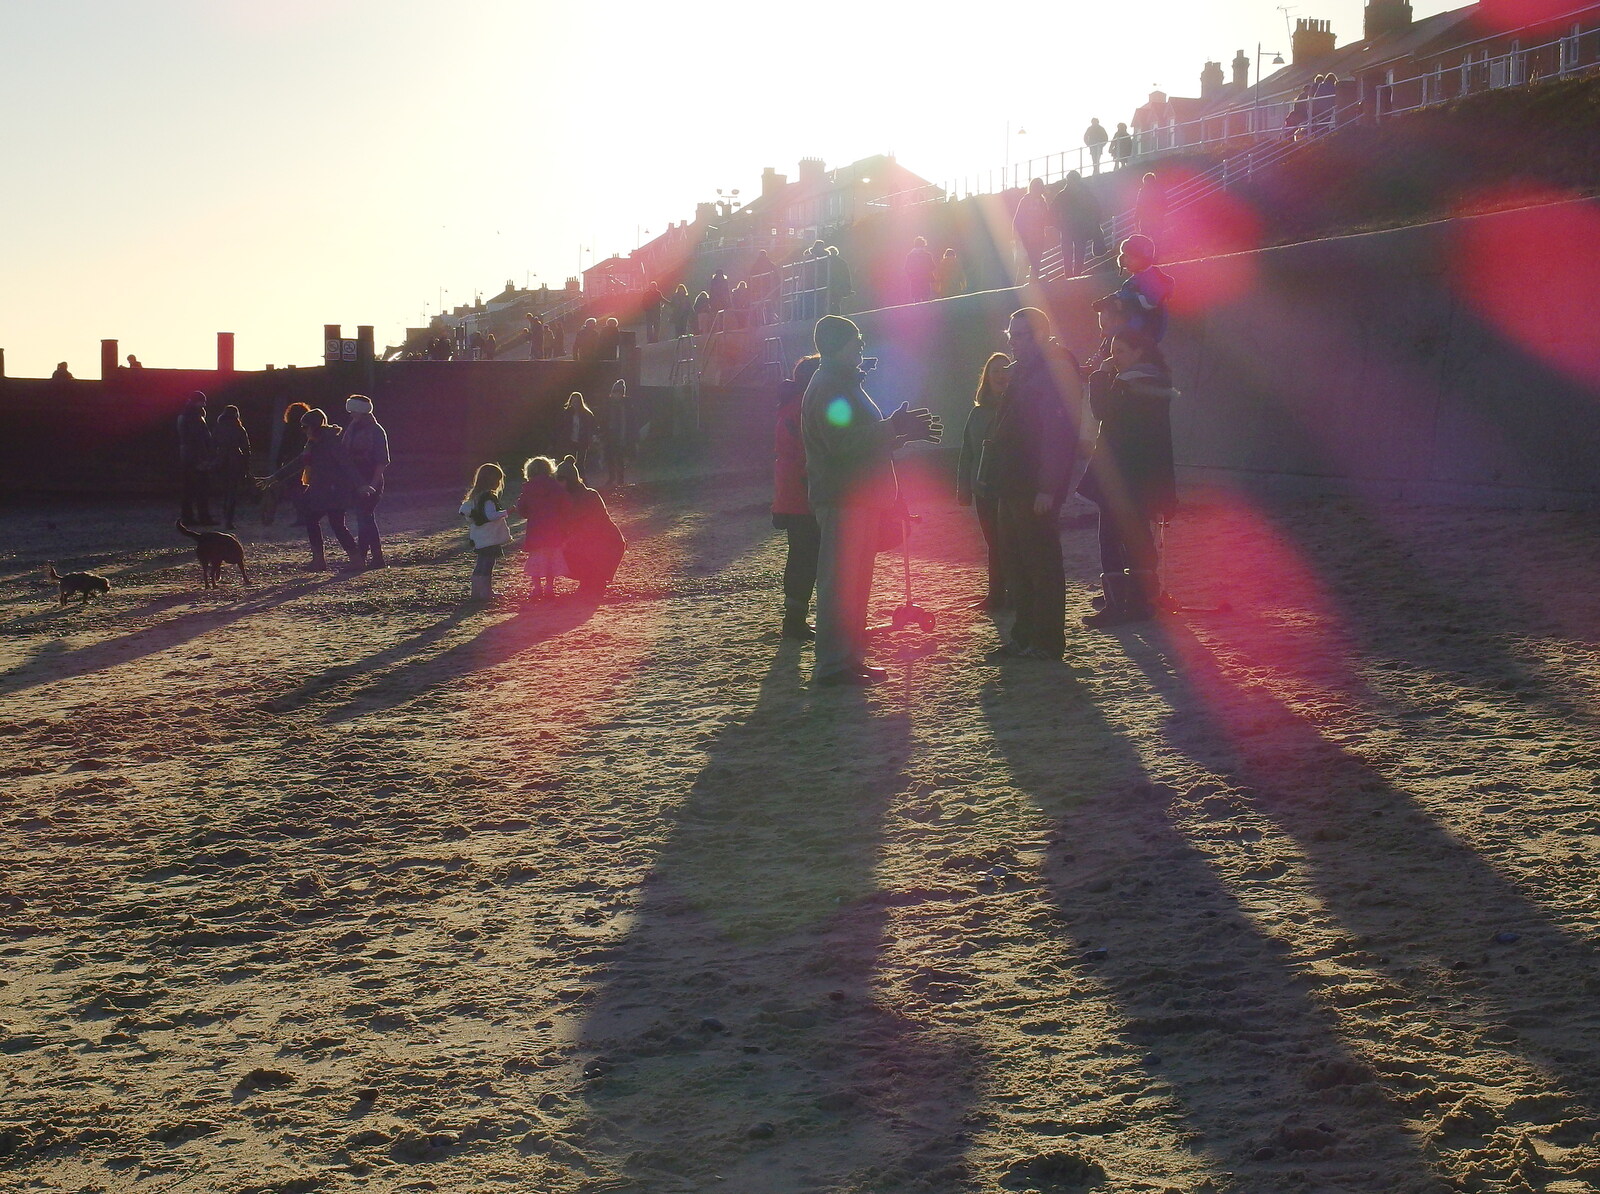 Beach-goers in the sun from Post-Christmas Southwold, Suffolk - 29th December 2013